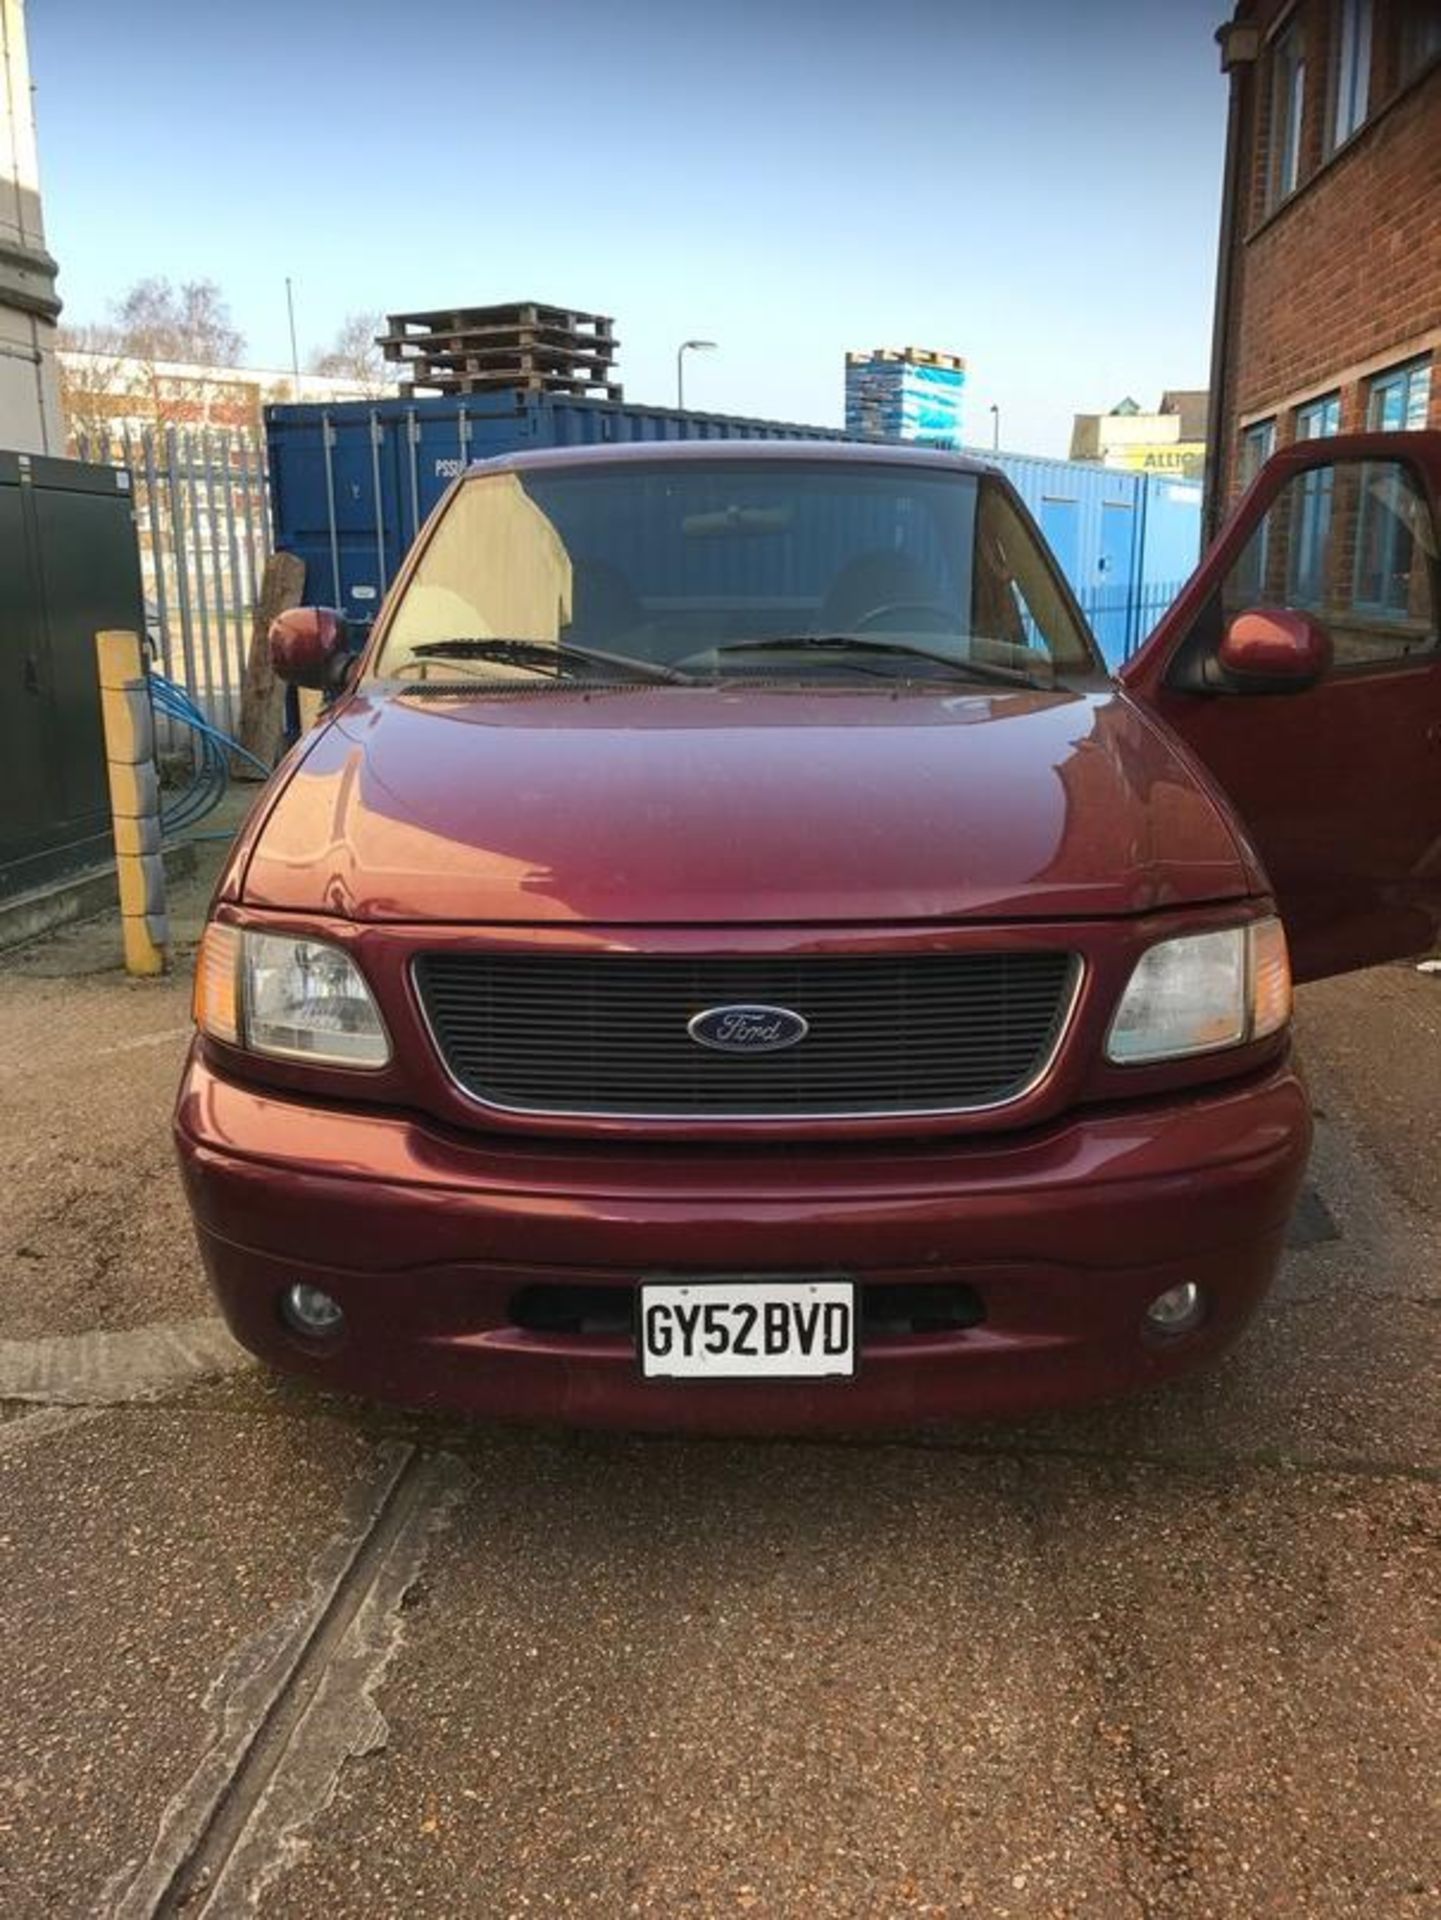 [GY52 BVD] Ford F150 LX Pickup (LHD) (Red) [Import] - Image 2 of 7